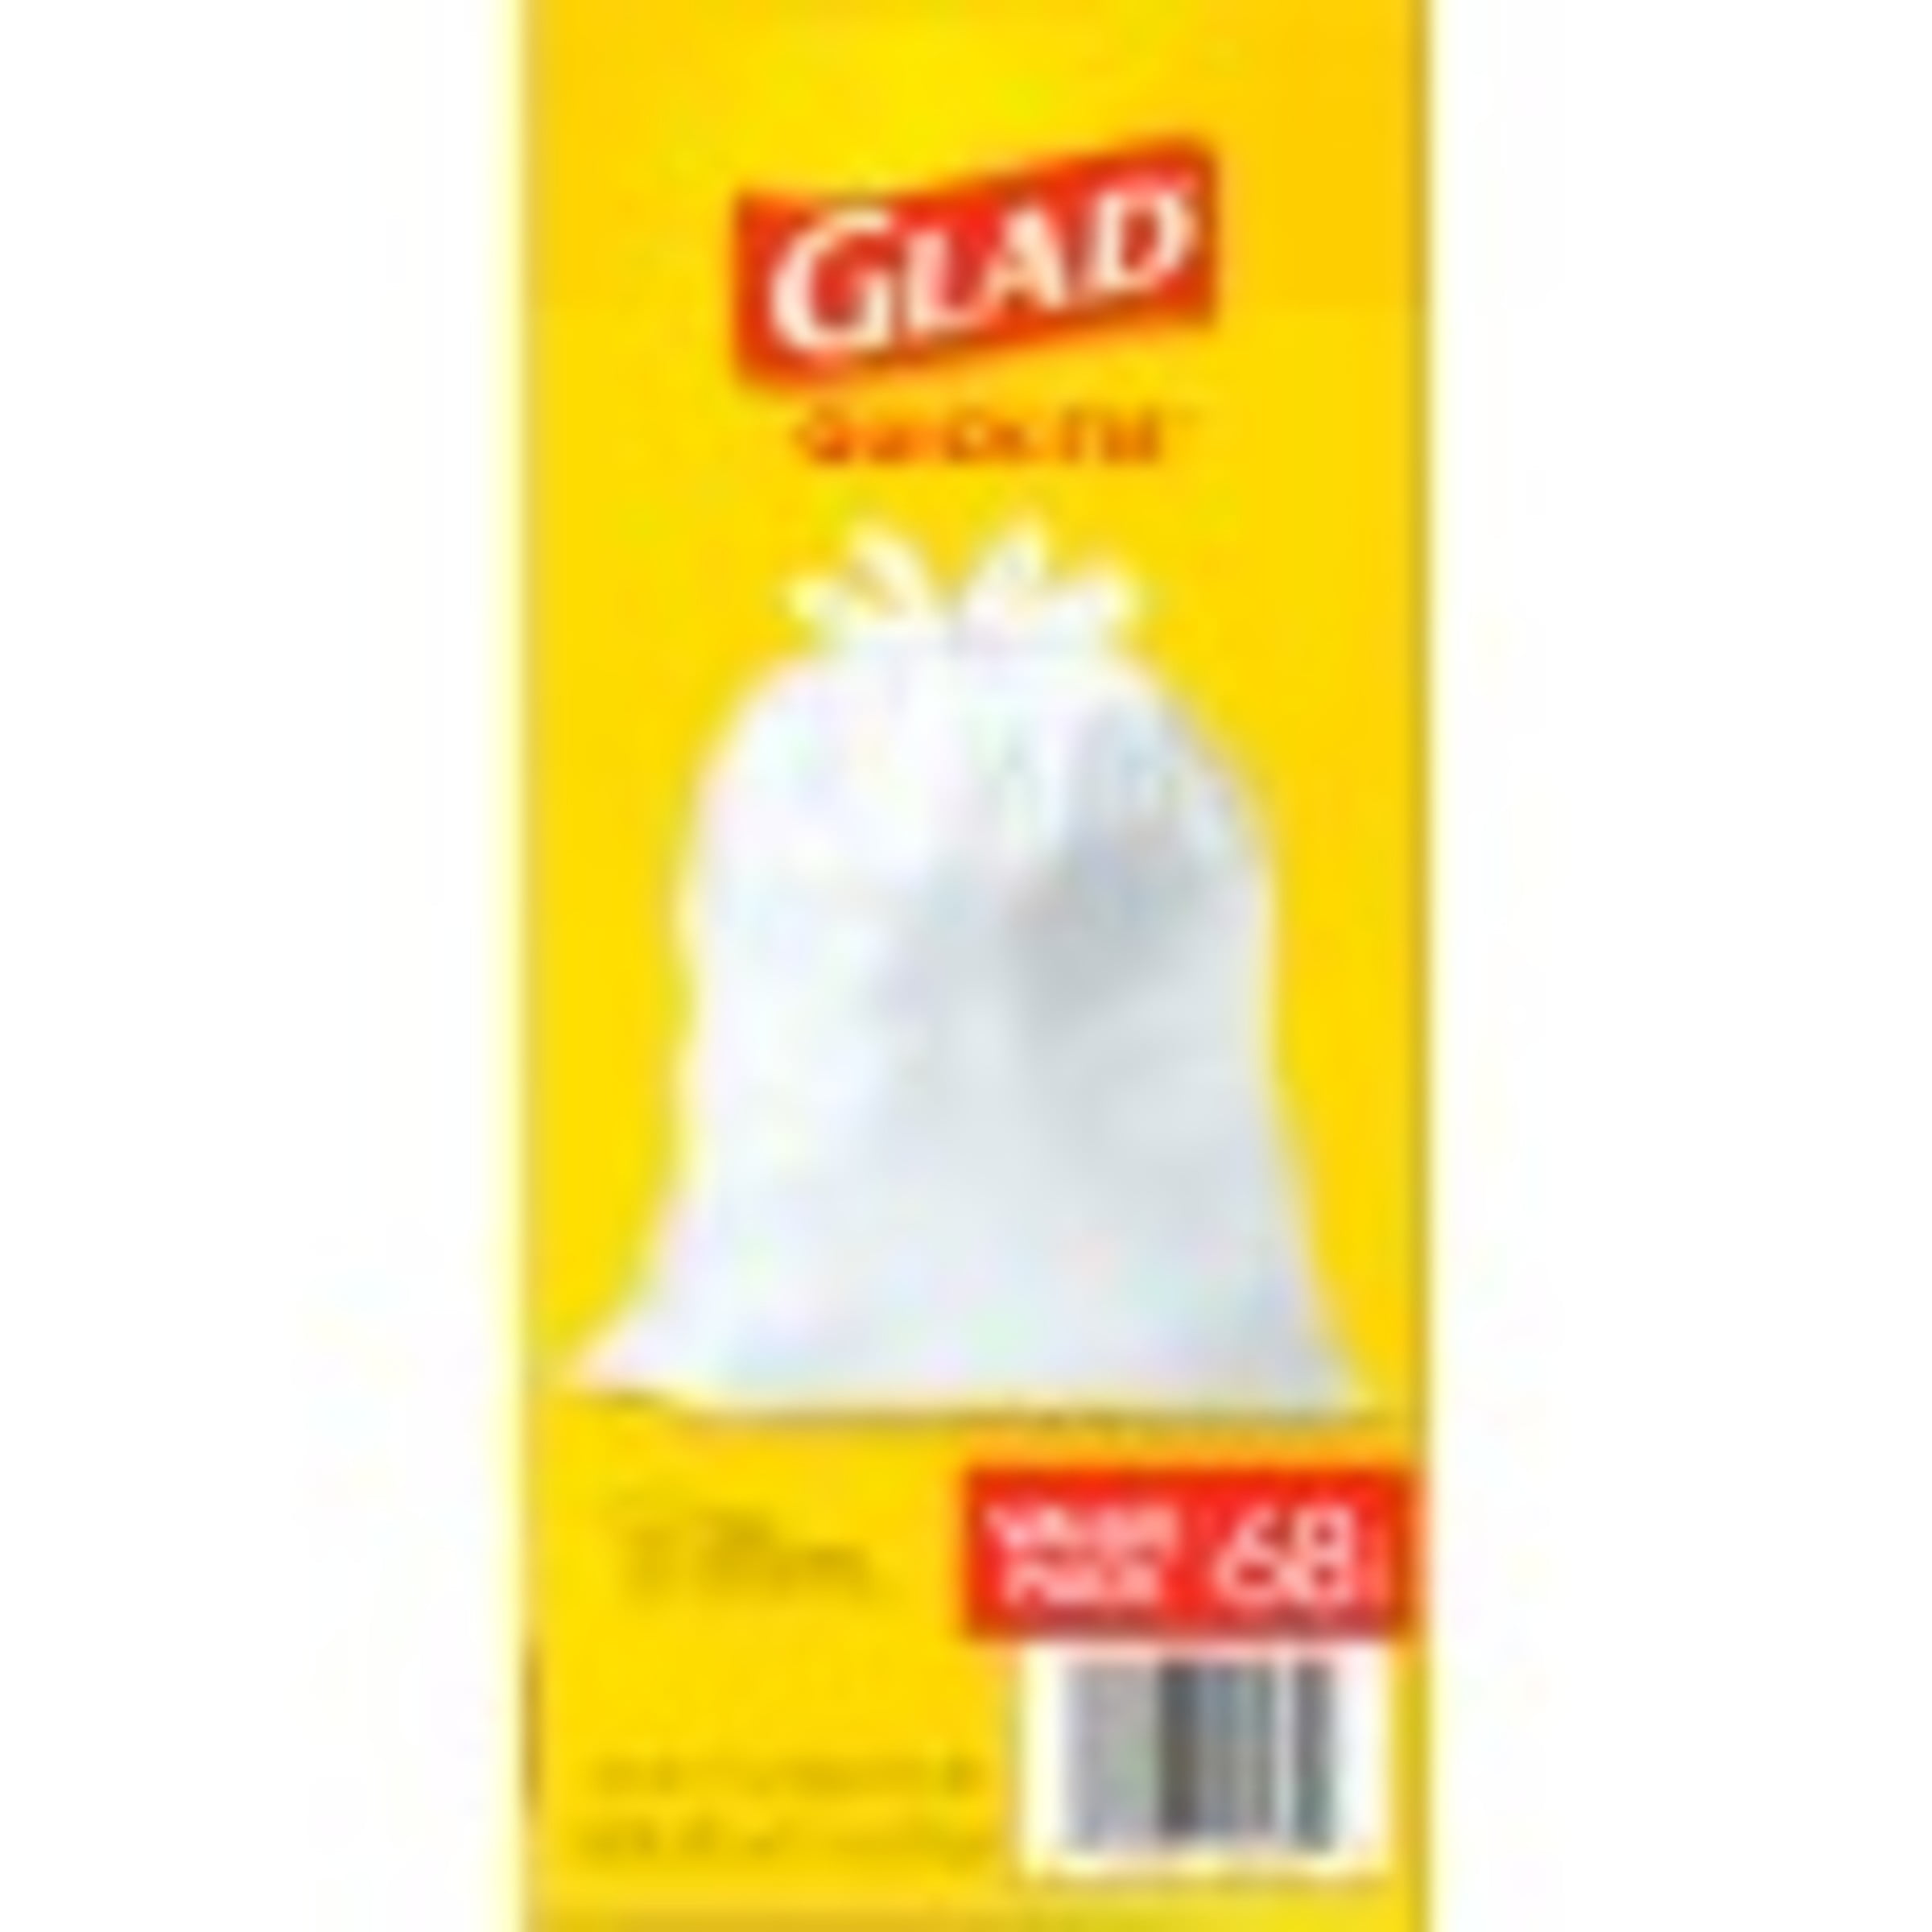 Glad Tall Kitchen Quick-Tie Trash Bags, 68 ct - Pay Less Super Markets